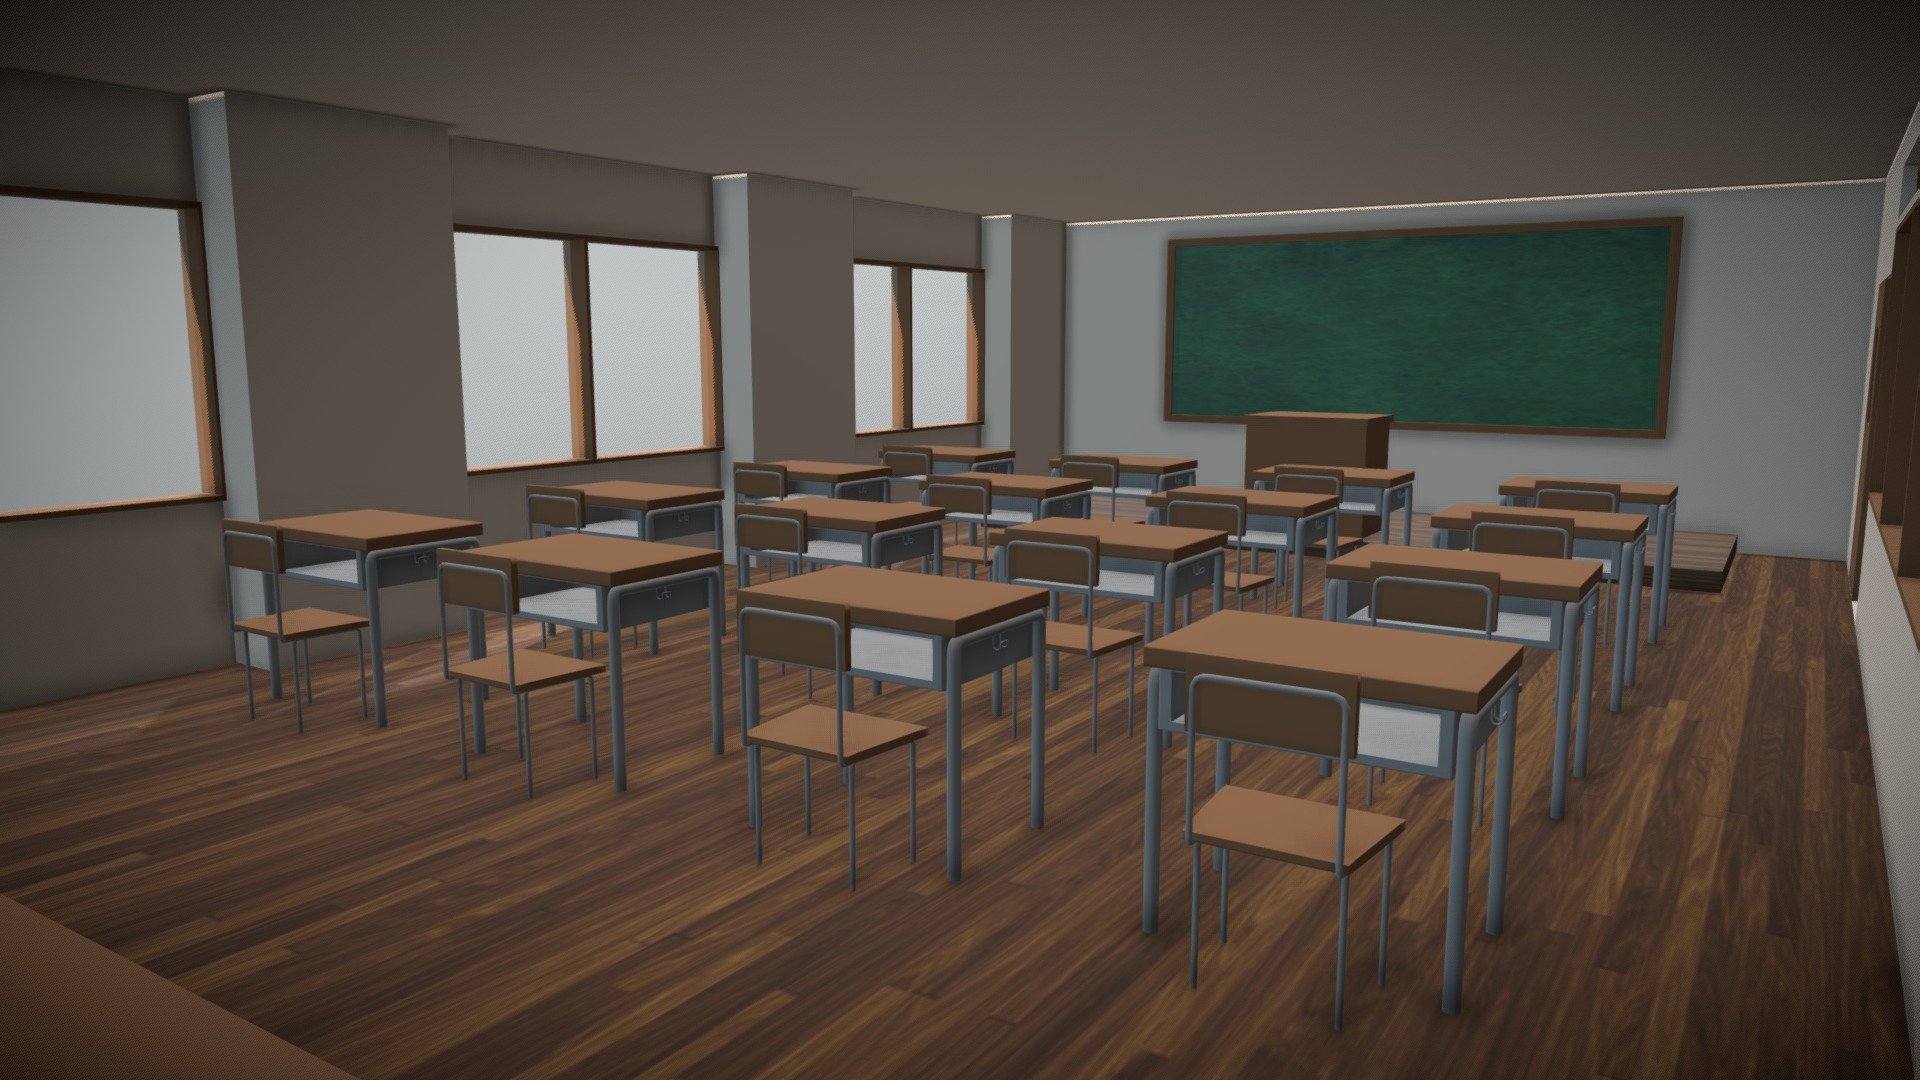 A simple anime classroom that I created with Maya 2016. Texturing done in both photoshop CS5 and Maya 2016. Can be used for game environment/level. I took reference from anime call &ldquo;Assassination Classroom, Aho Girl and Eyeshield 21